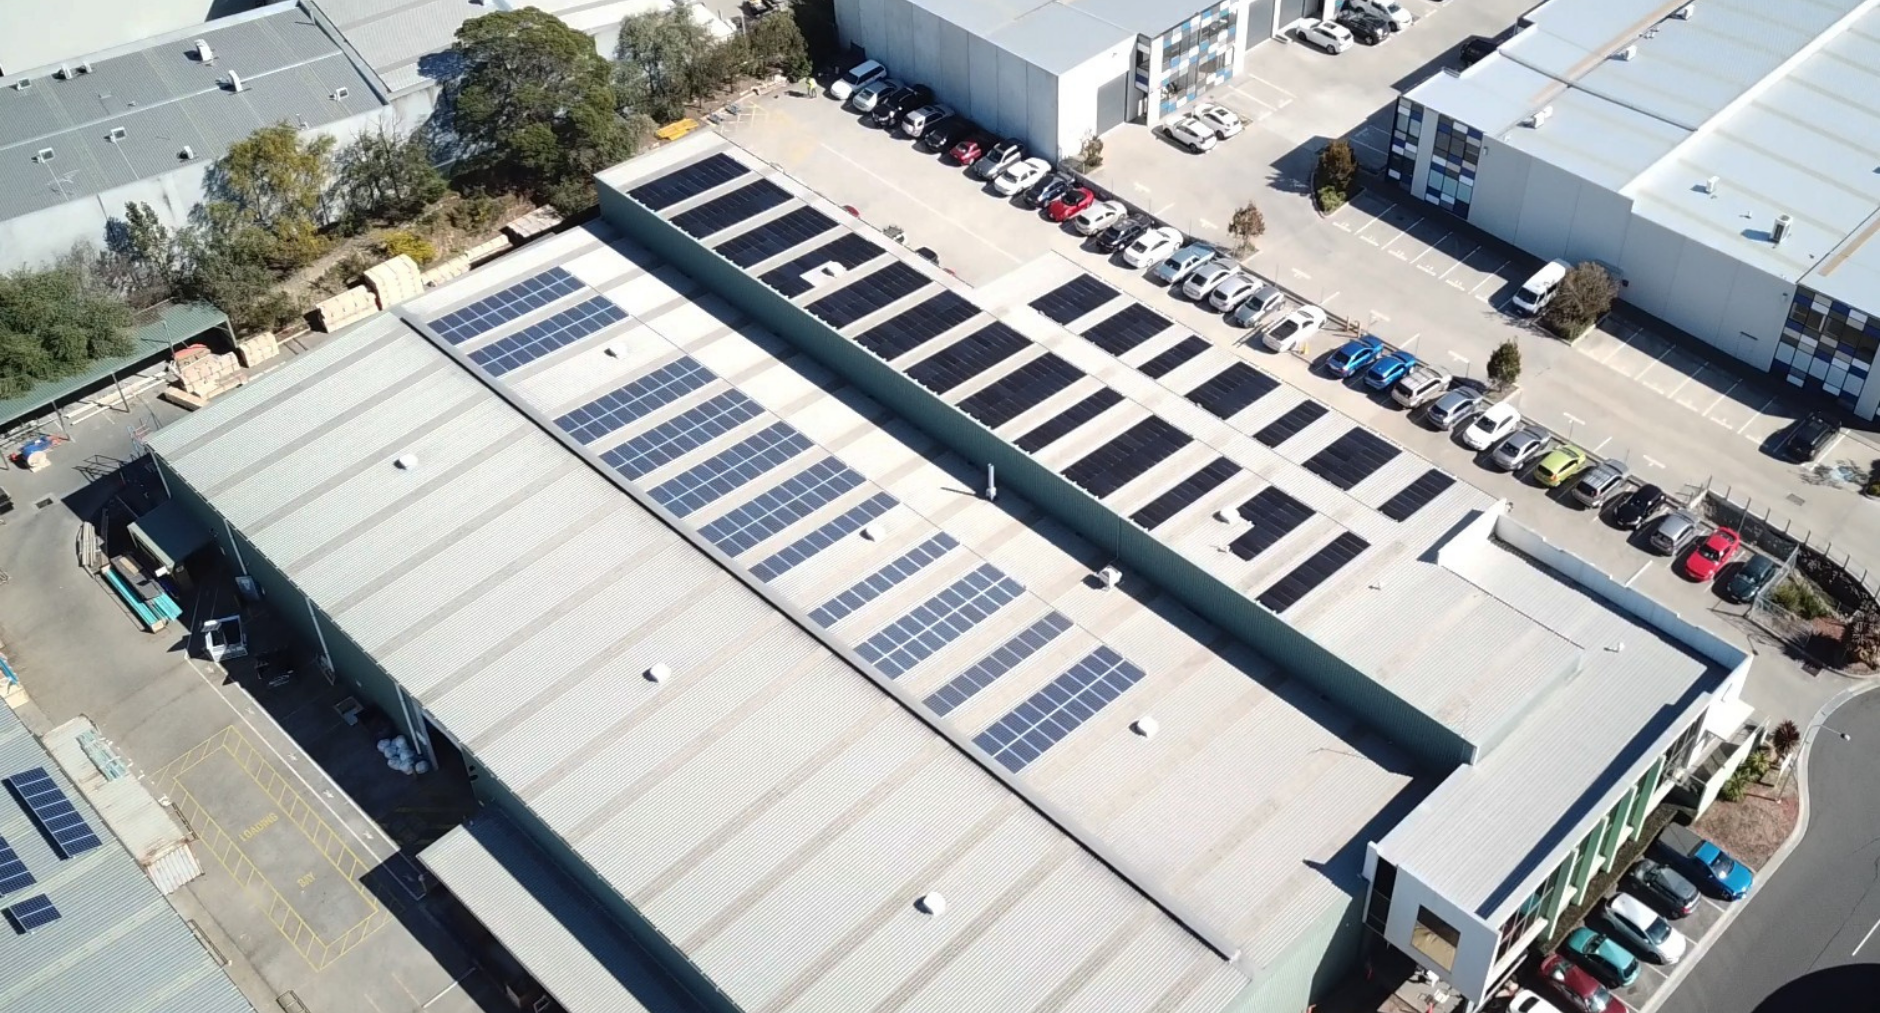 RFI Bayswater manufacturing facility 100kw system